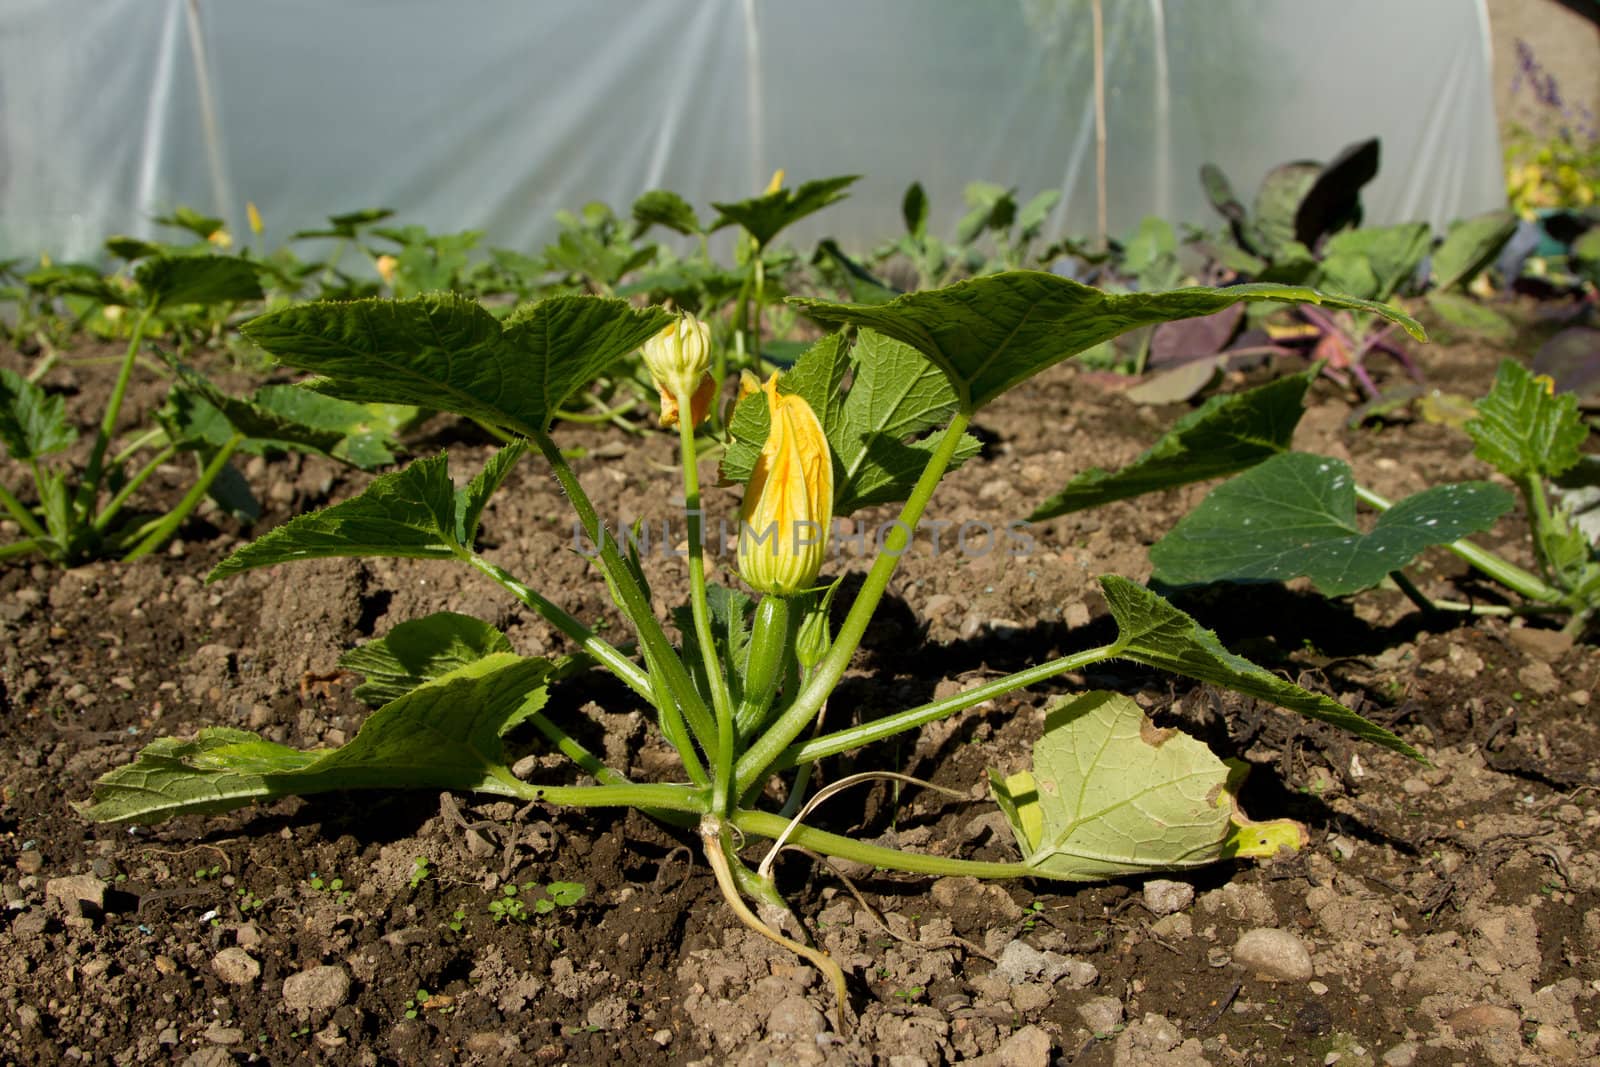 A vegetable patch with a courgette plant flowering in the foreground.